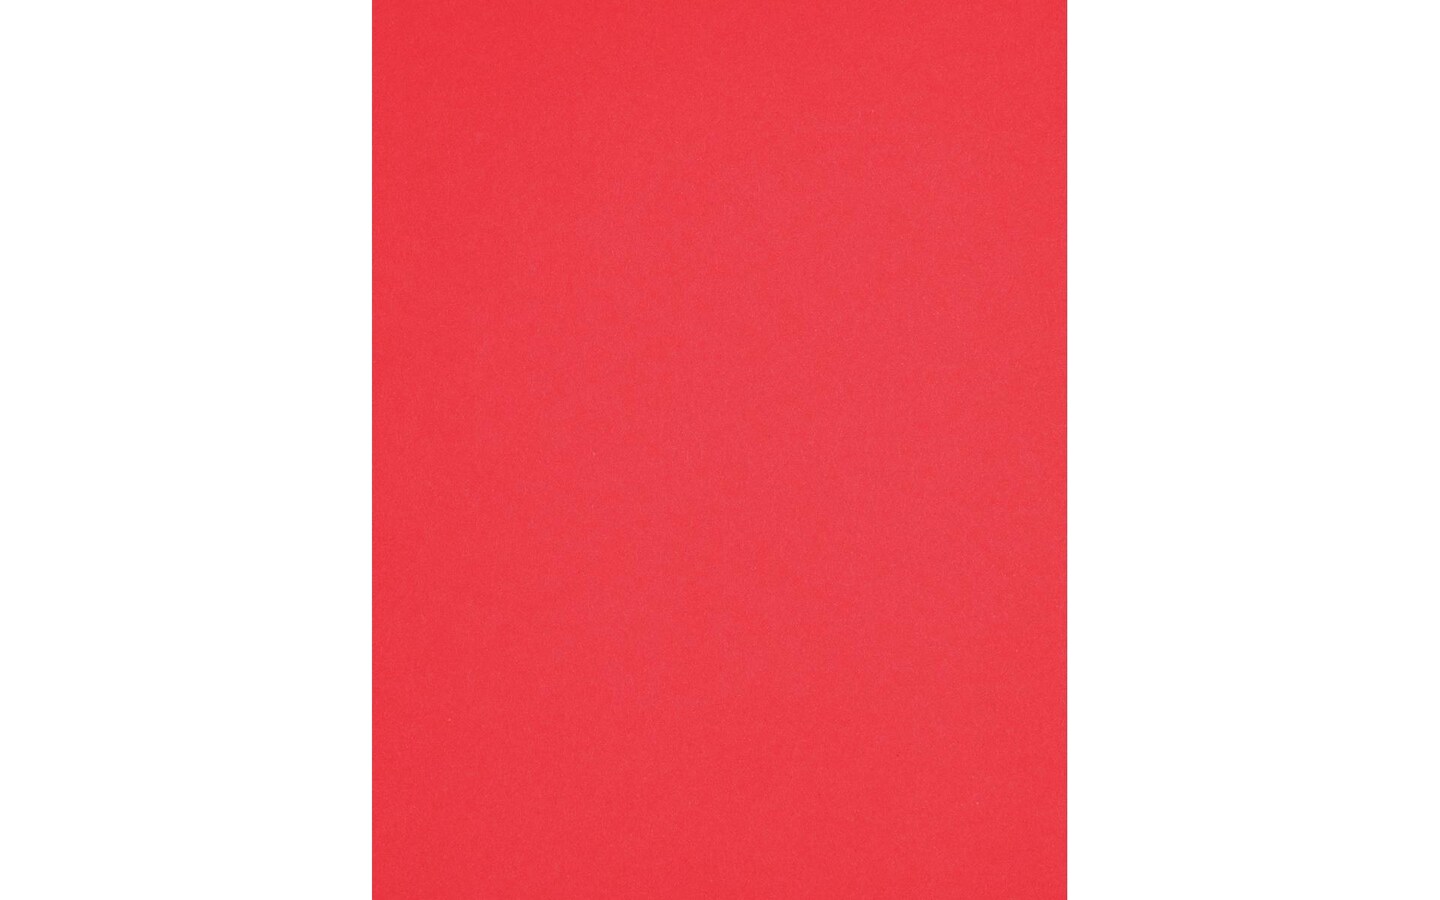 PA Paper Accents Smooth Cardstock 8.5 x 11 Cherry Red, 65lb colored cardstock  paper for card making, scrapbooking, printing, quilling and crafts, 1000  piece box